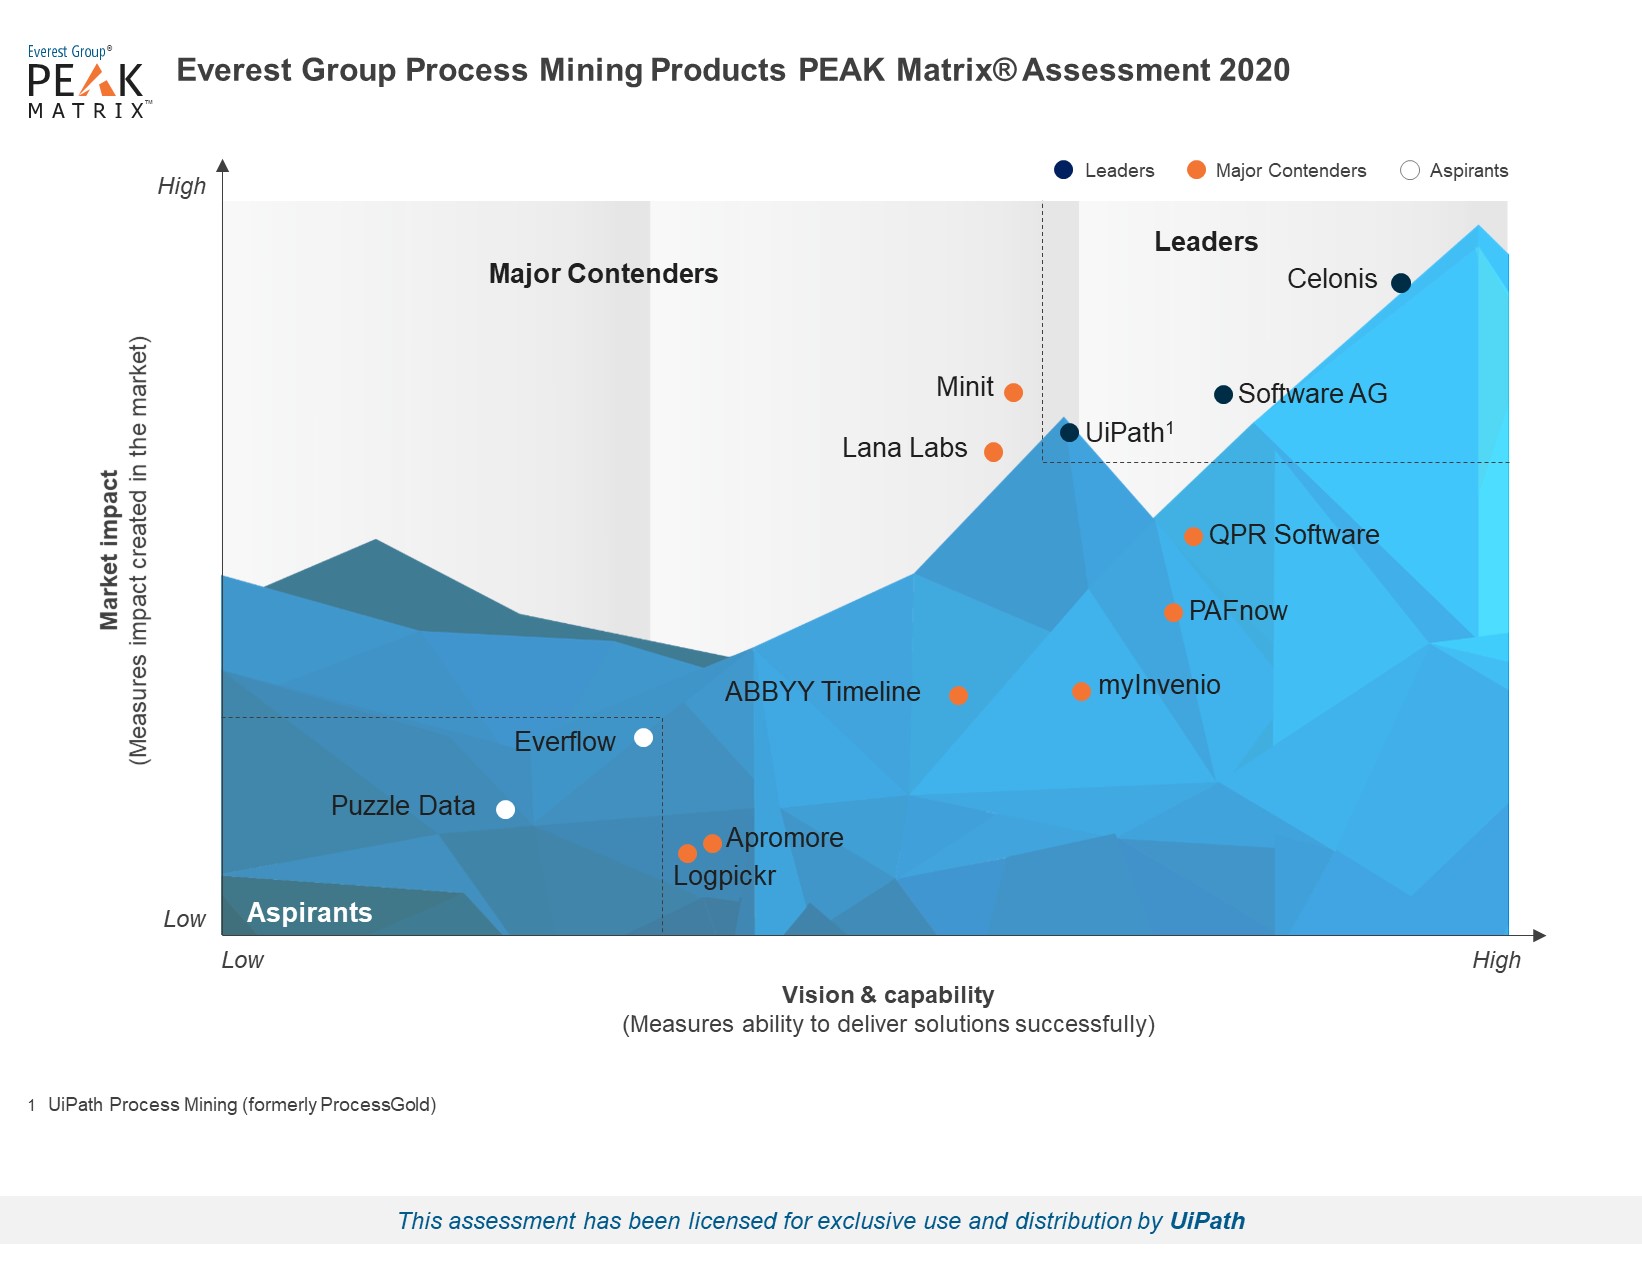 UiPath Process Mining Leader in Everest Process Mining Products PEAK Matrix Report for 2020